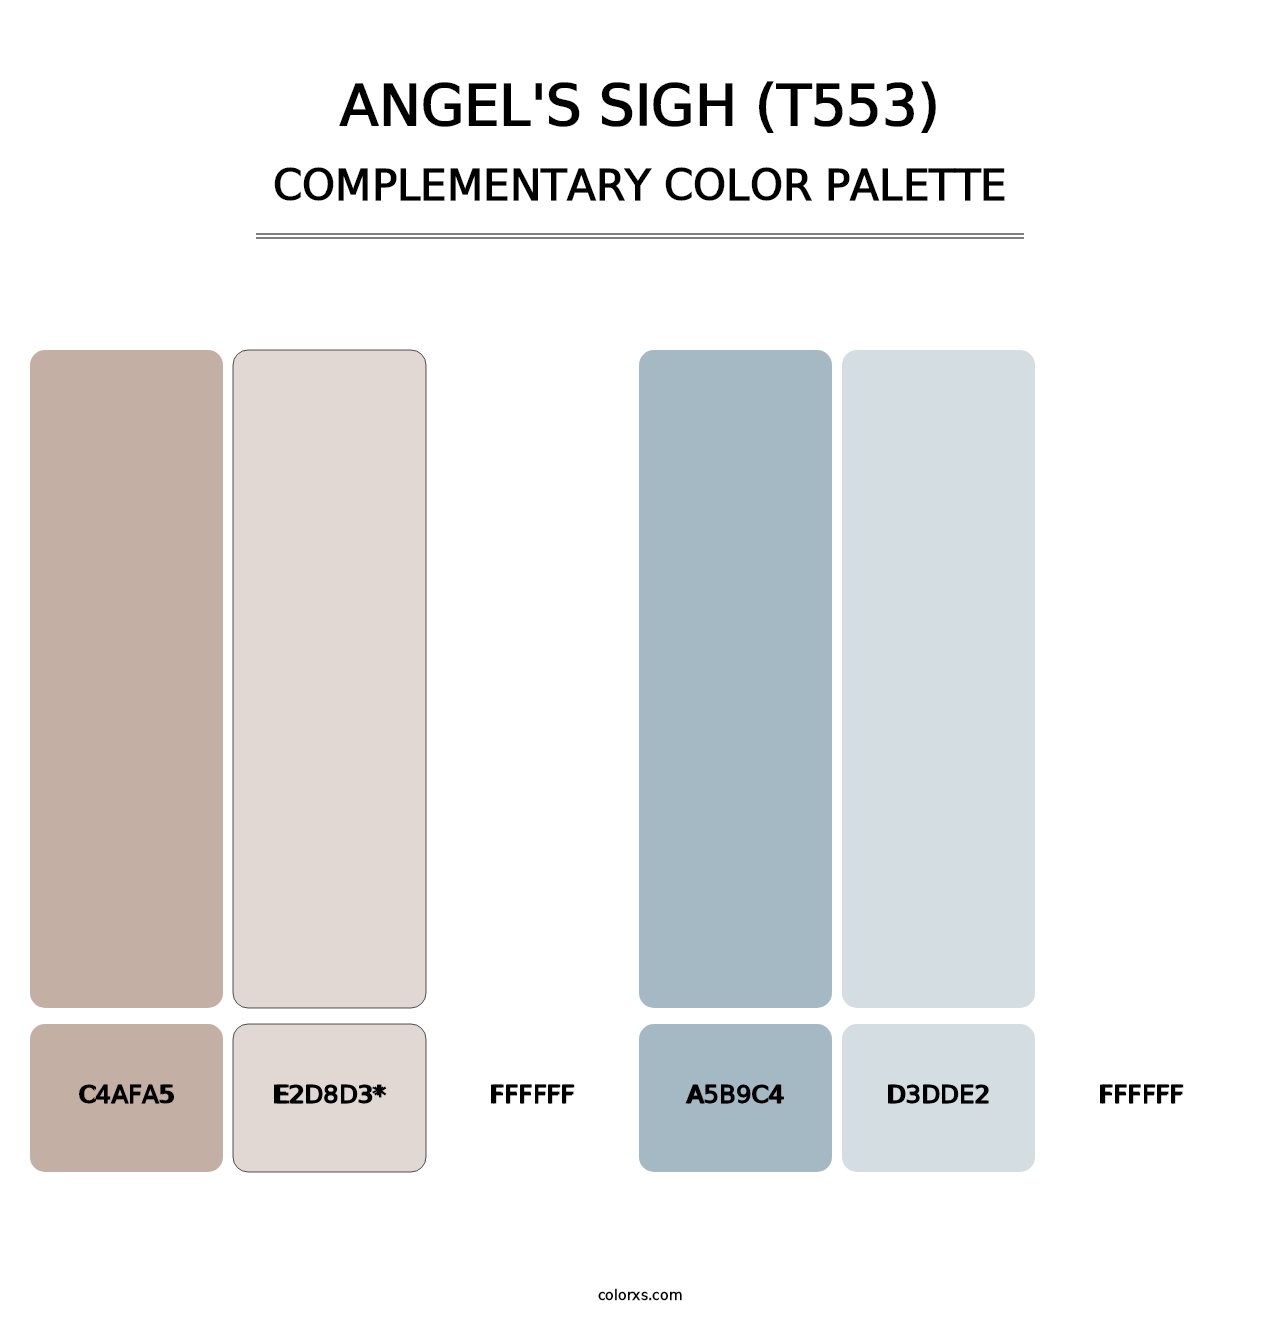 Angel's Sigh (T553) - Complementary Color Palette